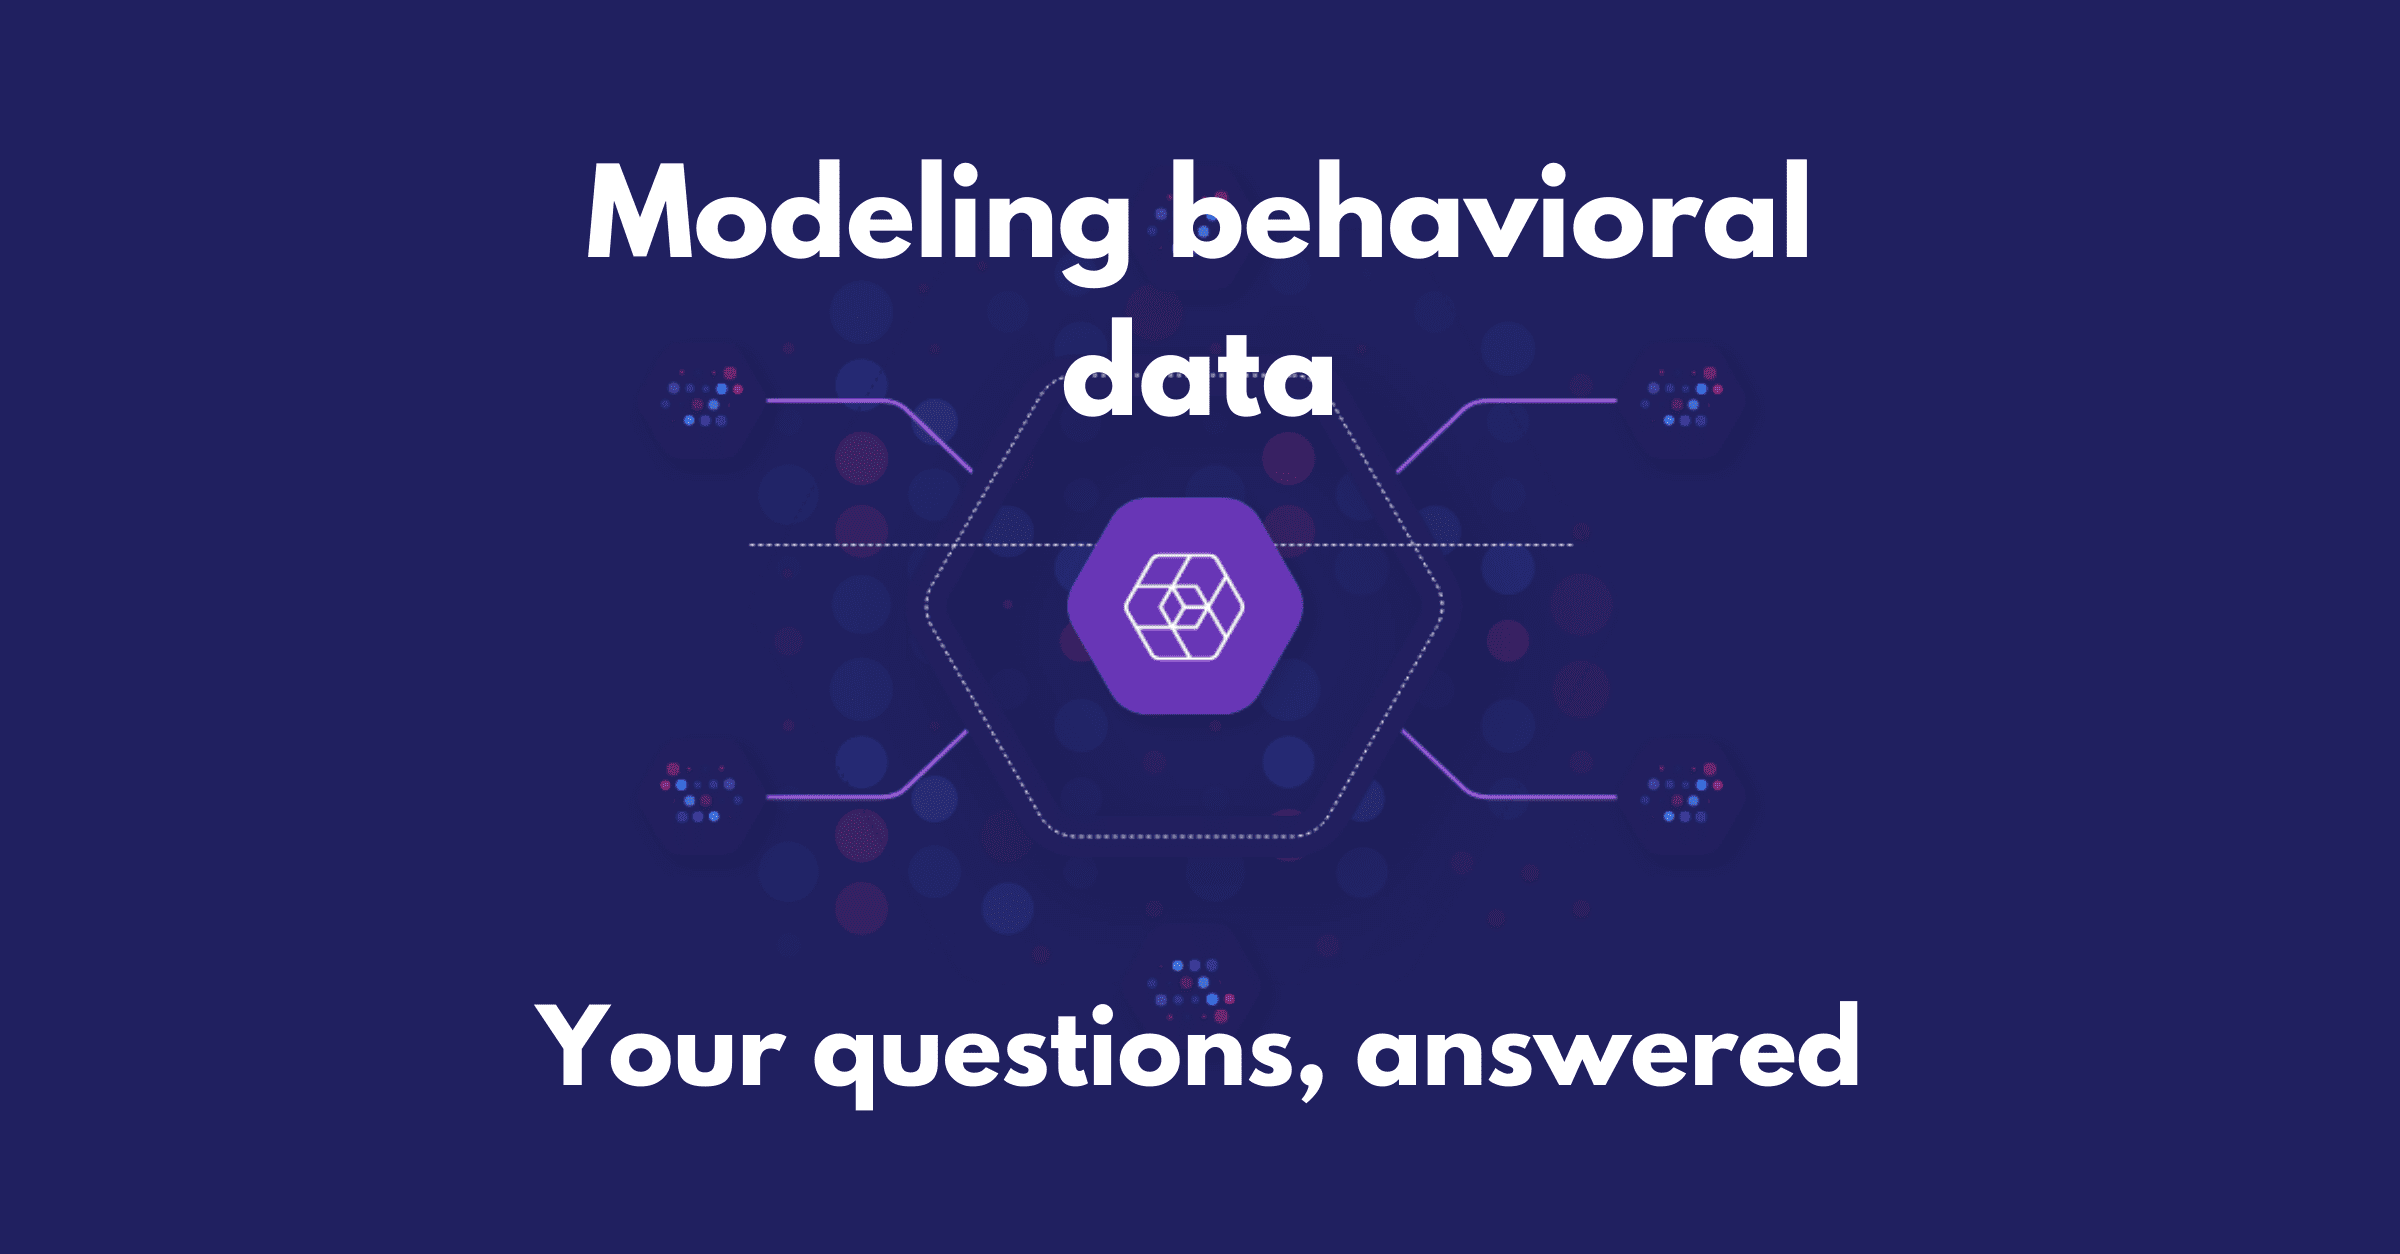 Modeling behavioral data. Your questions, answered